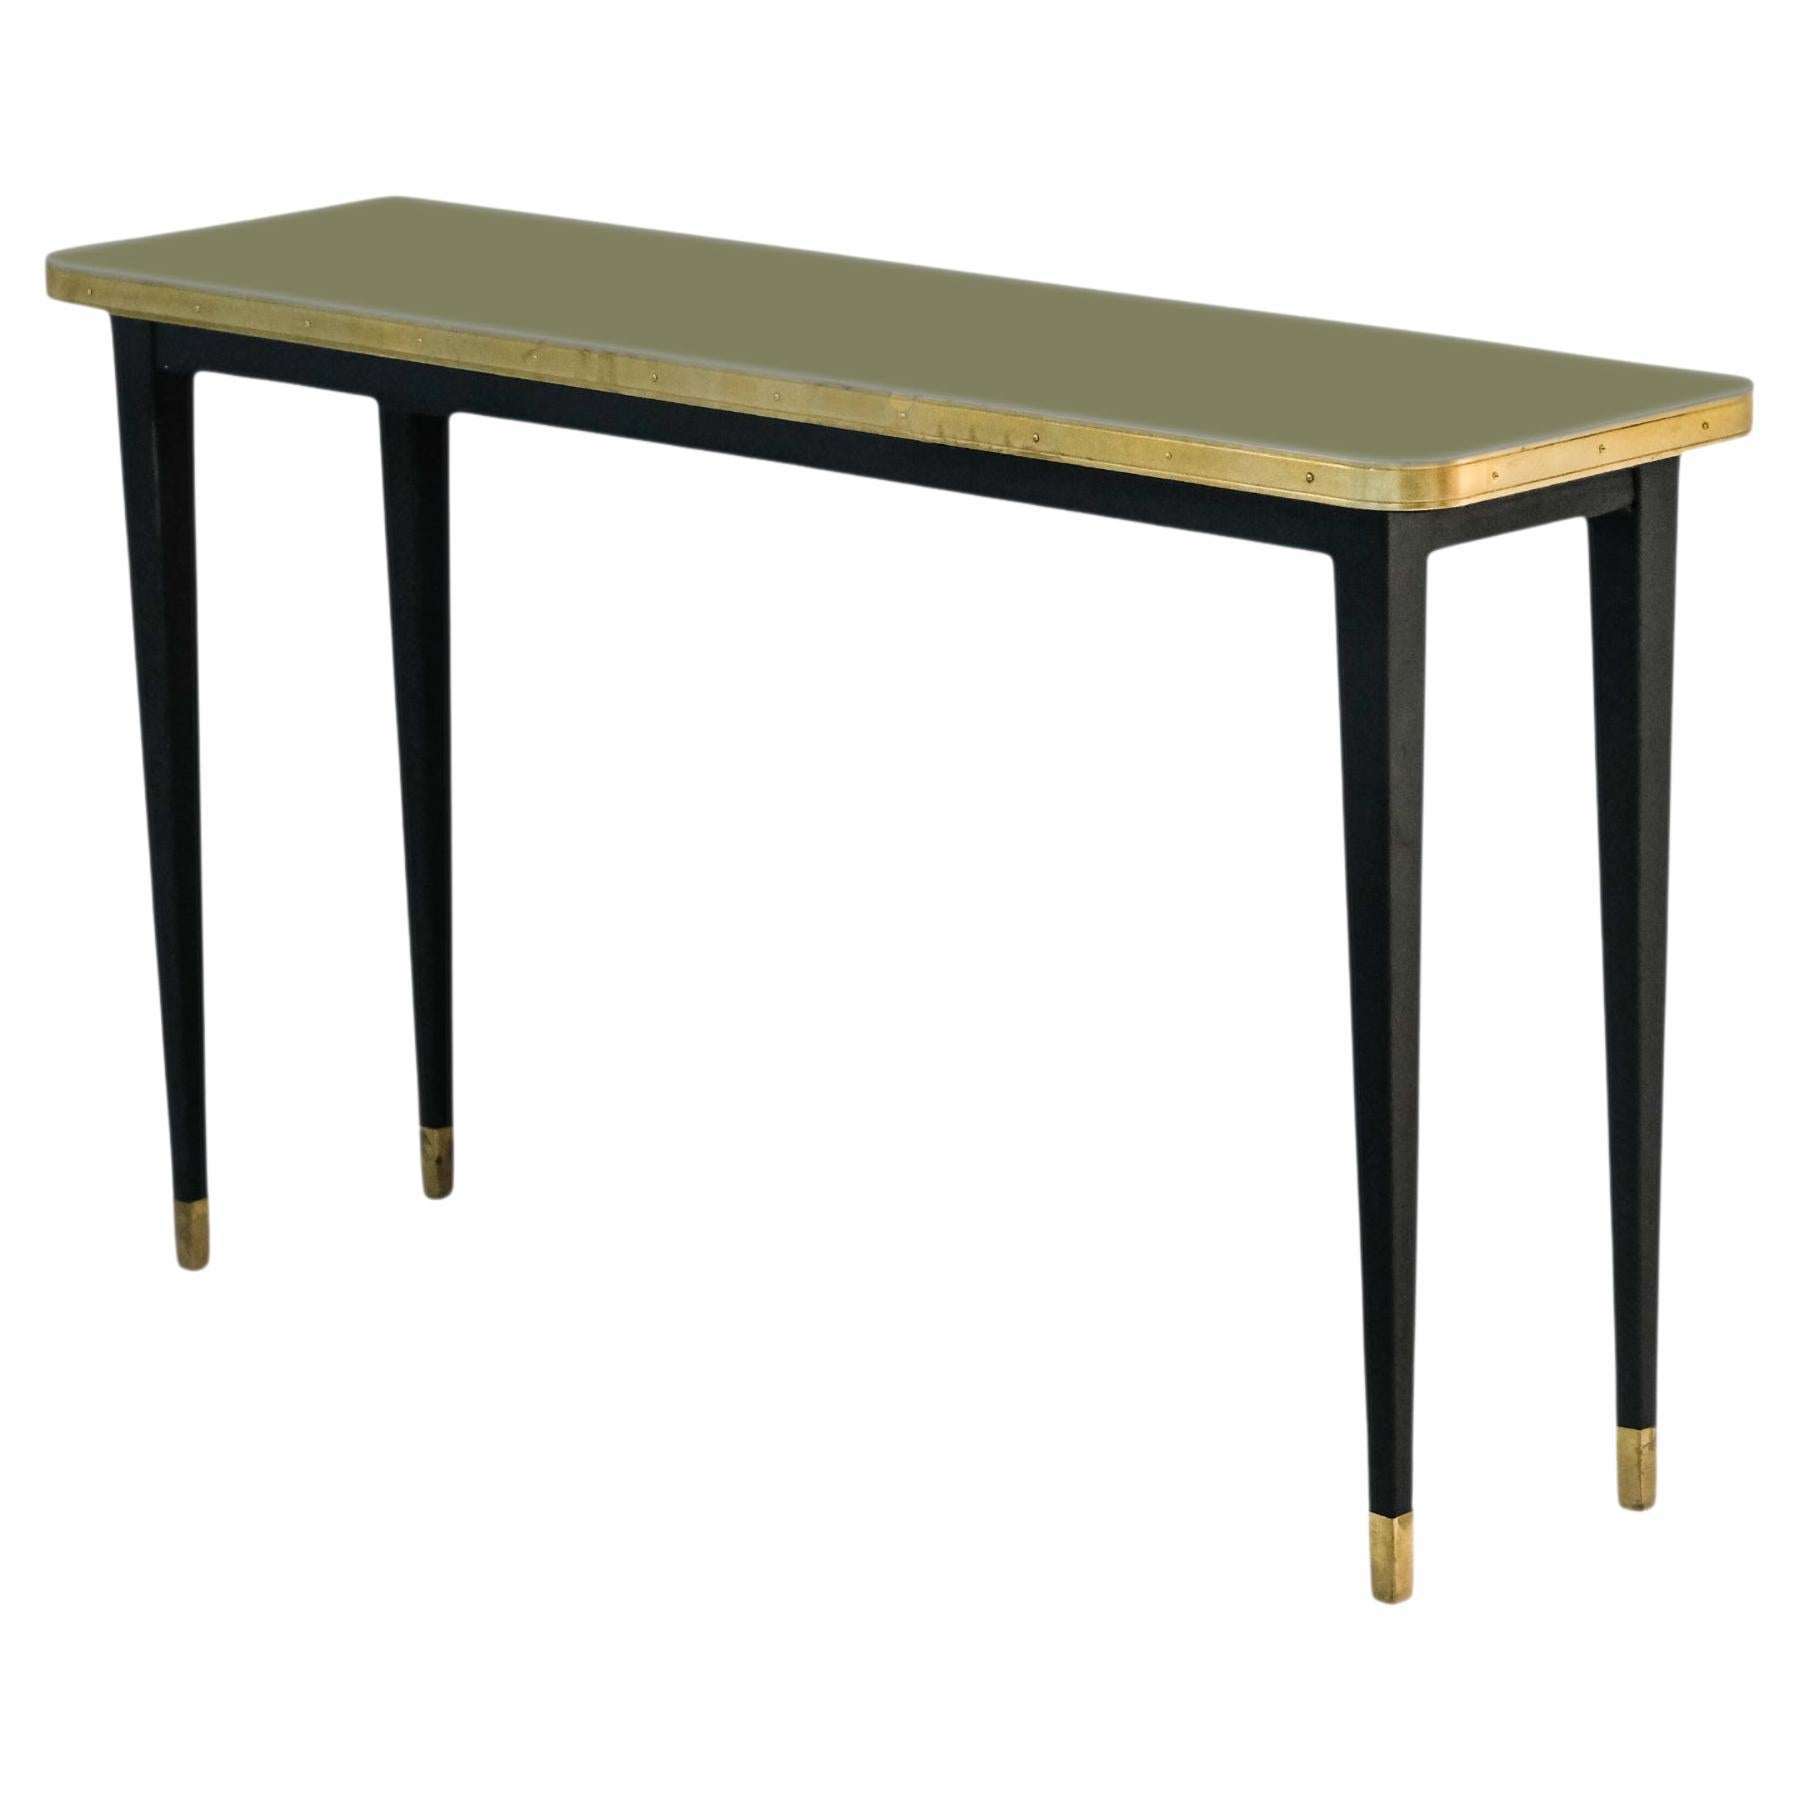 Console Table, High Gloss Laminate & Brass Details, Kashmir Green - L For Sale